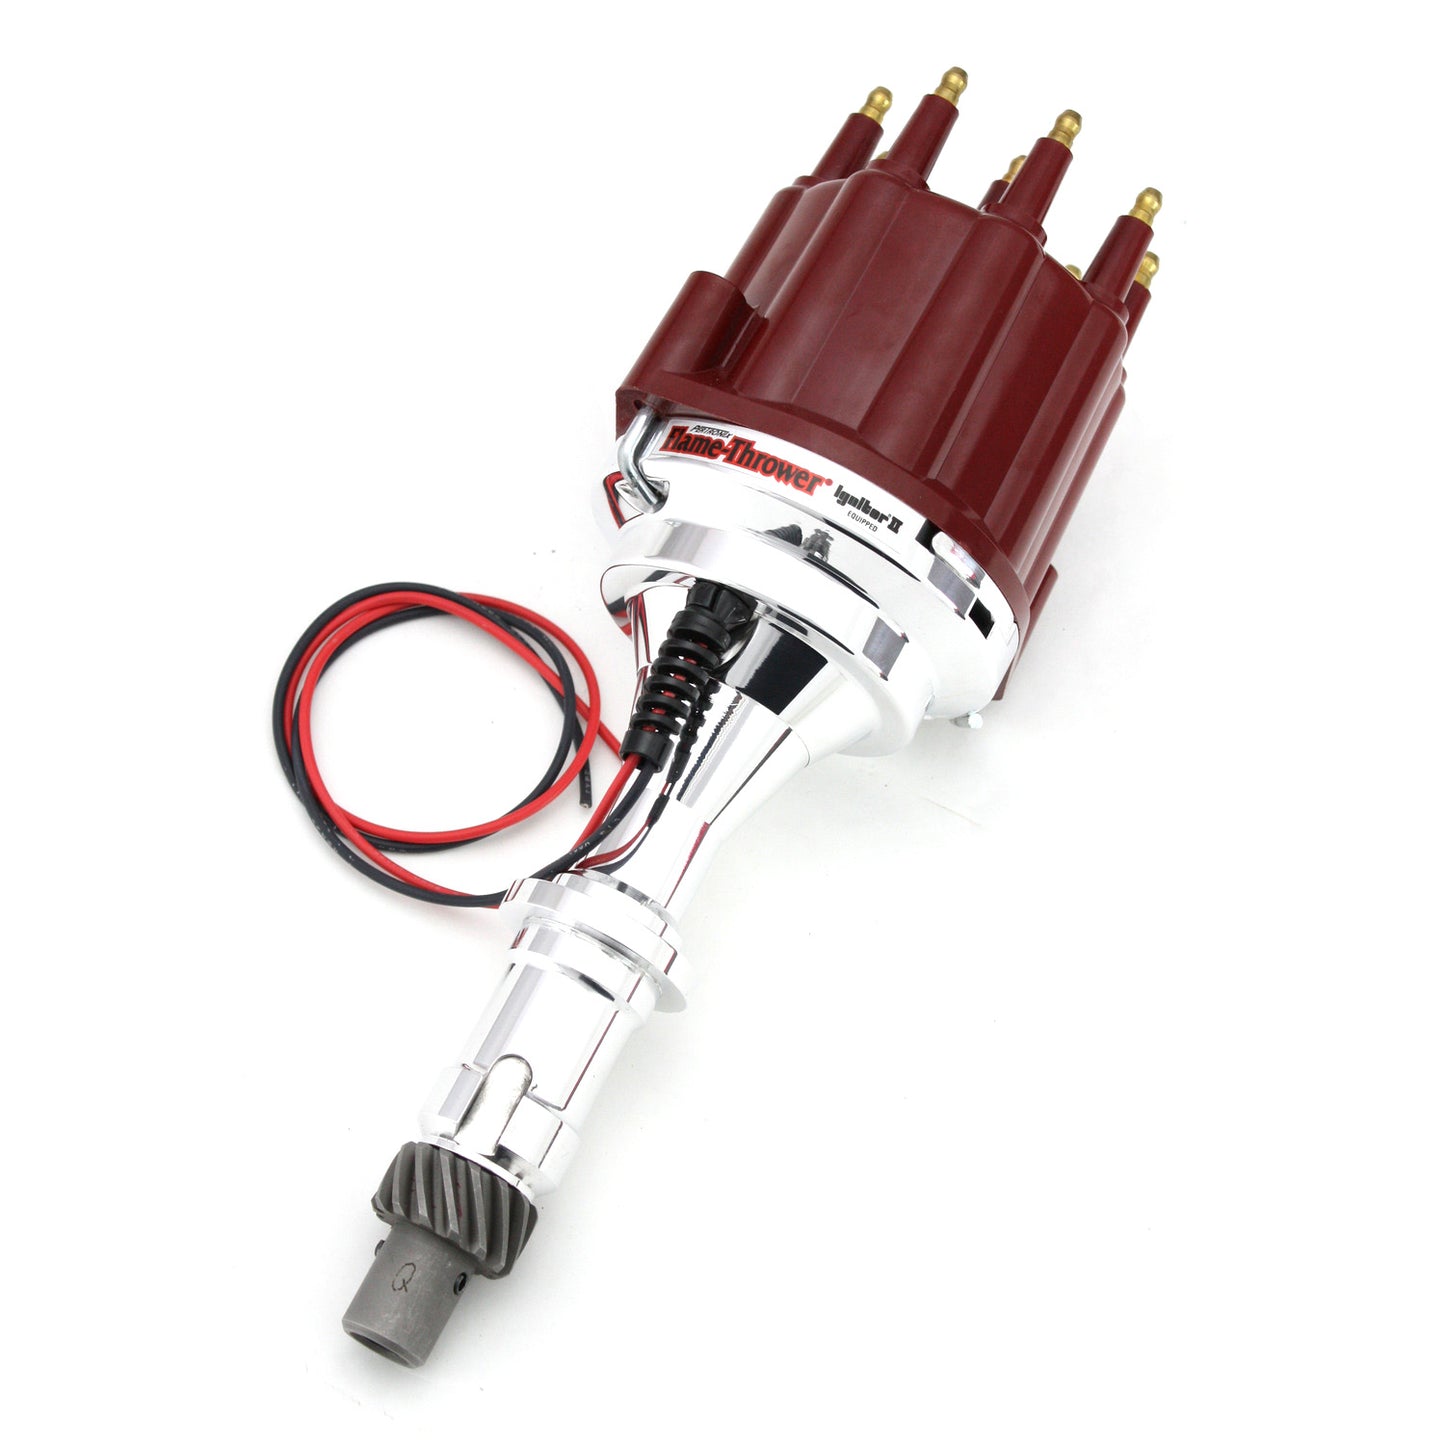 PerTronix D120811 Flame-Thrower Electronic Distributor Billet Pontiac V8 Plug and Play with Ignitor II Technology Non Vacuum Advance Red Male Cap